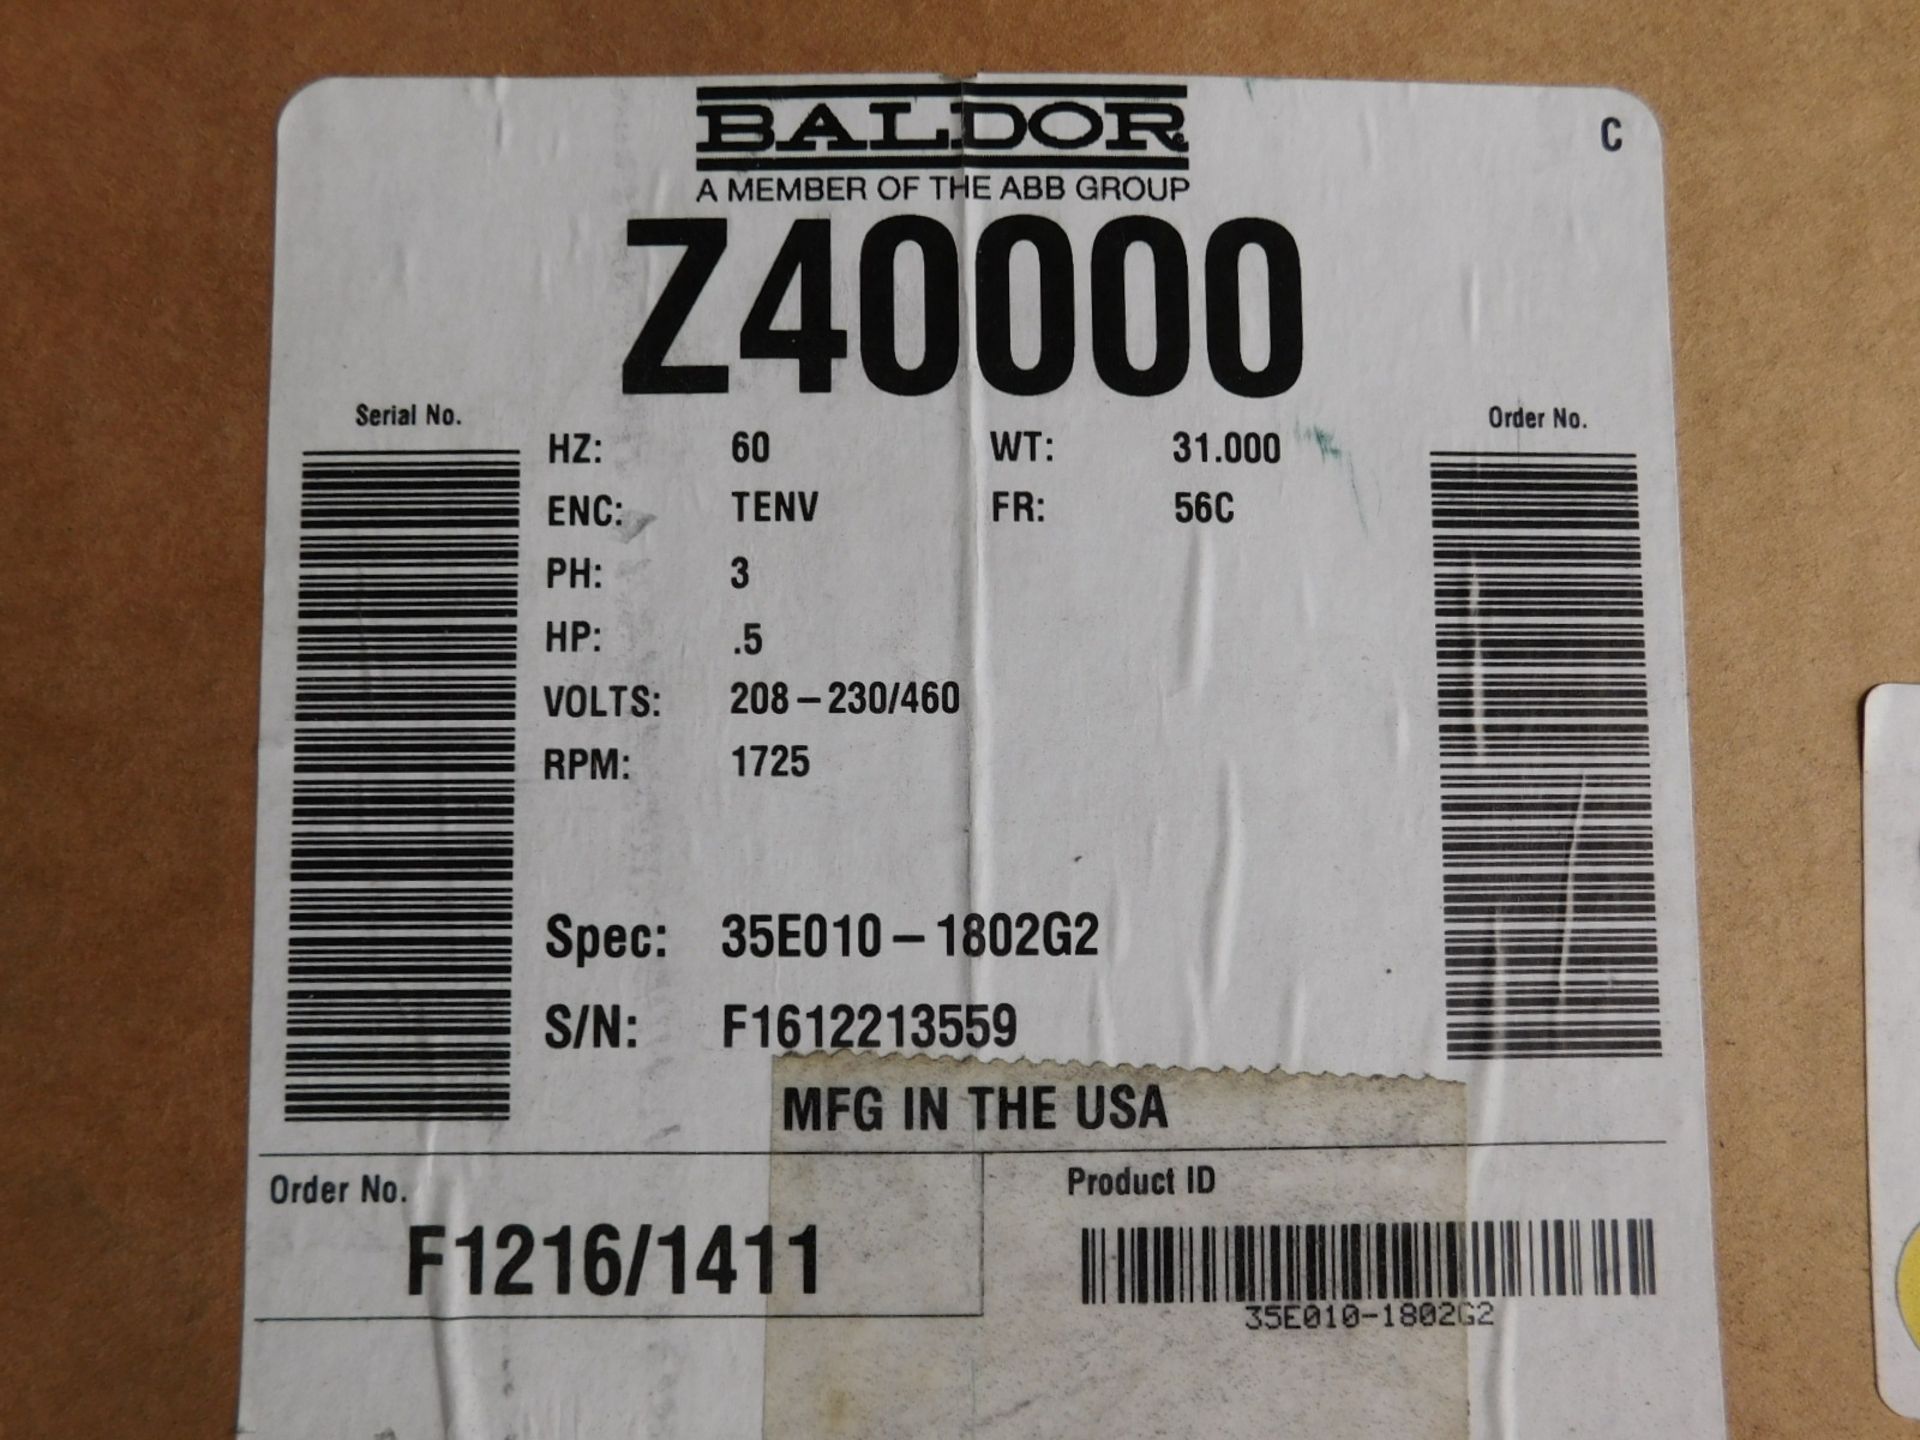 LOT/ (2) BALDOR 1/2 HP MOTORS, Z40000, B212, 1725 RPM, 208-230/460V/3PH, S/N: N/A (DELAYED - Image 2 of 3